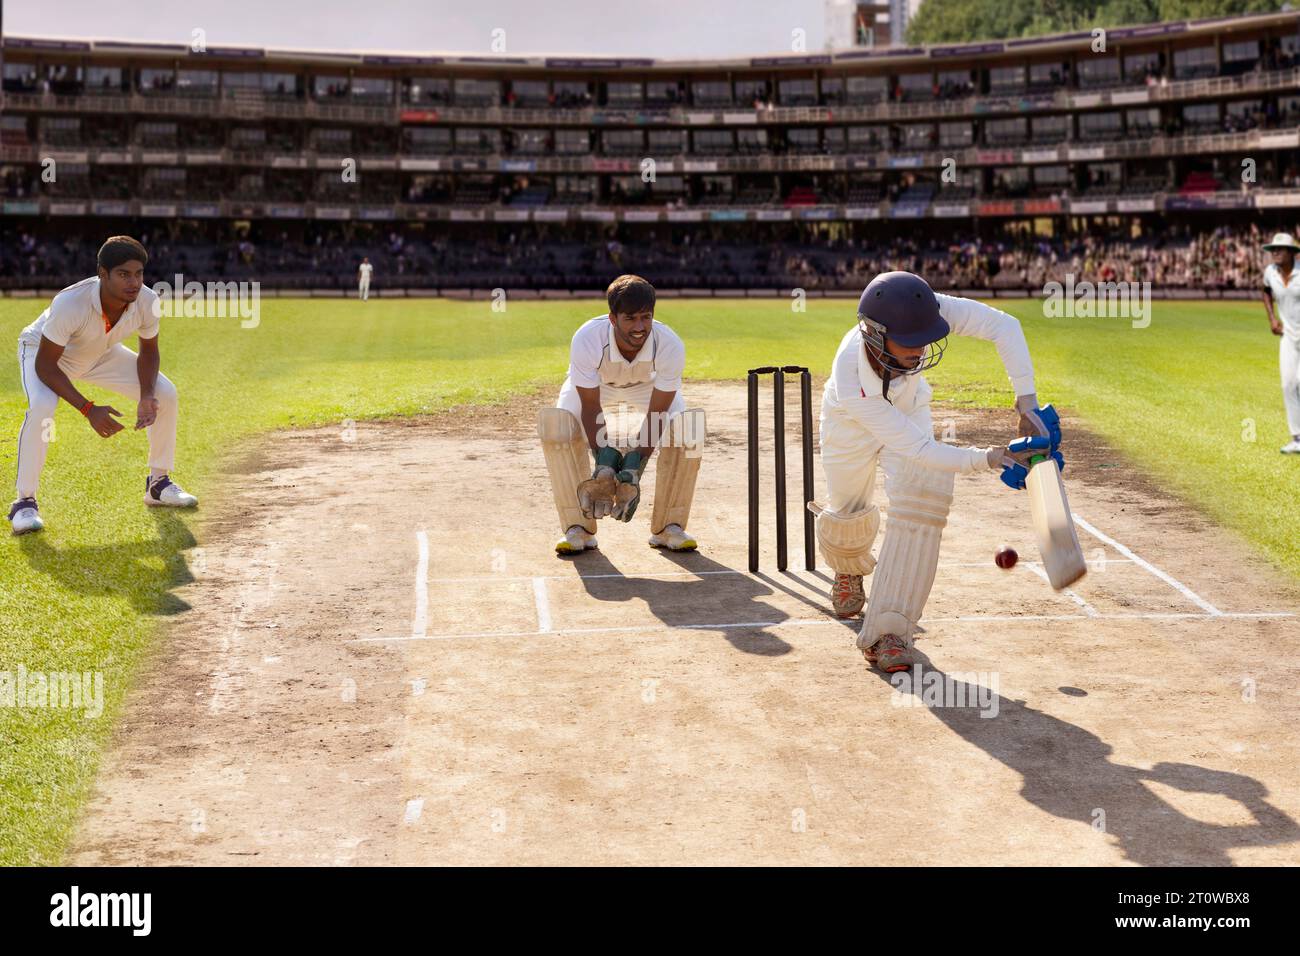 Batsman hitting the ball on the leg side while playing a cricket match Stock Photo